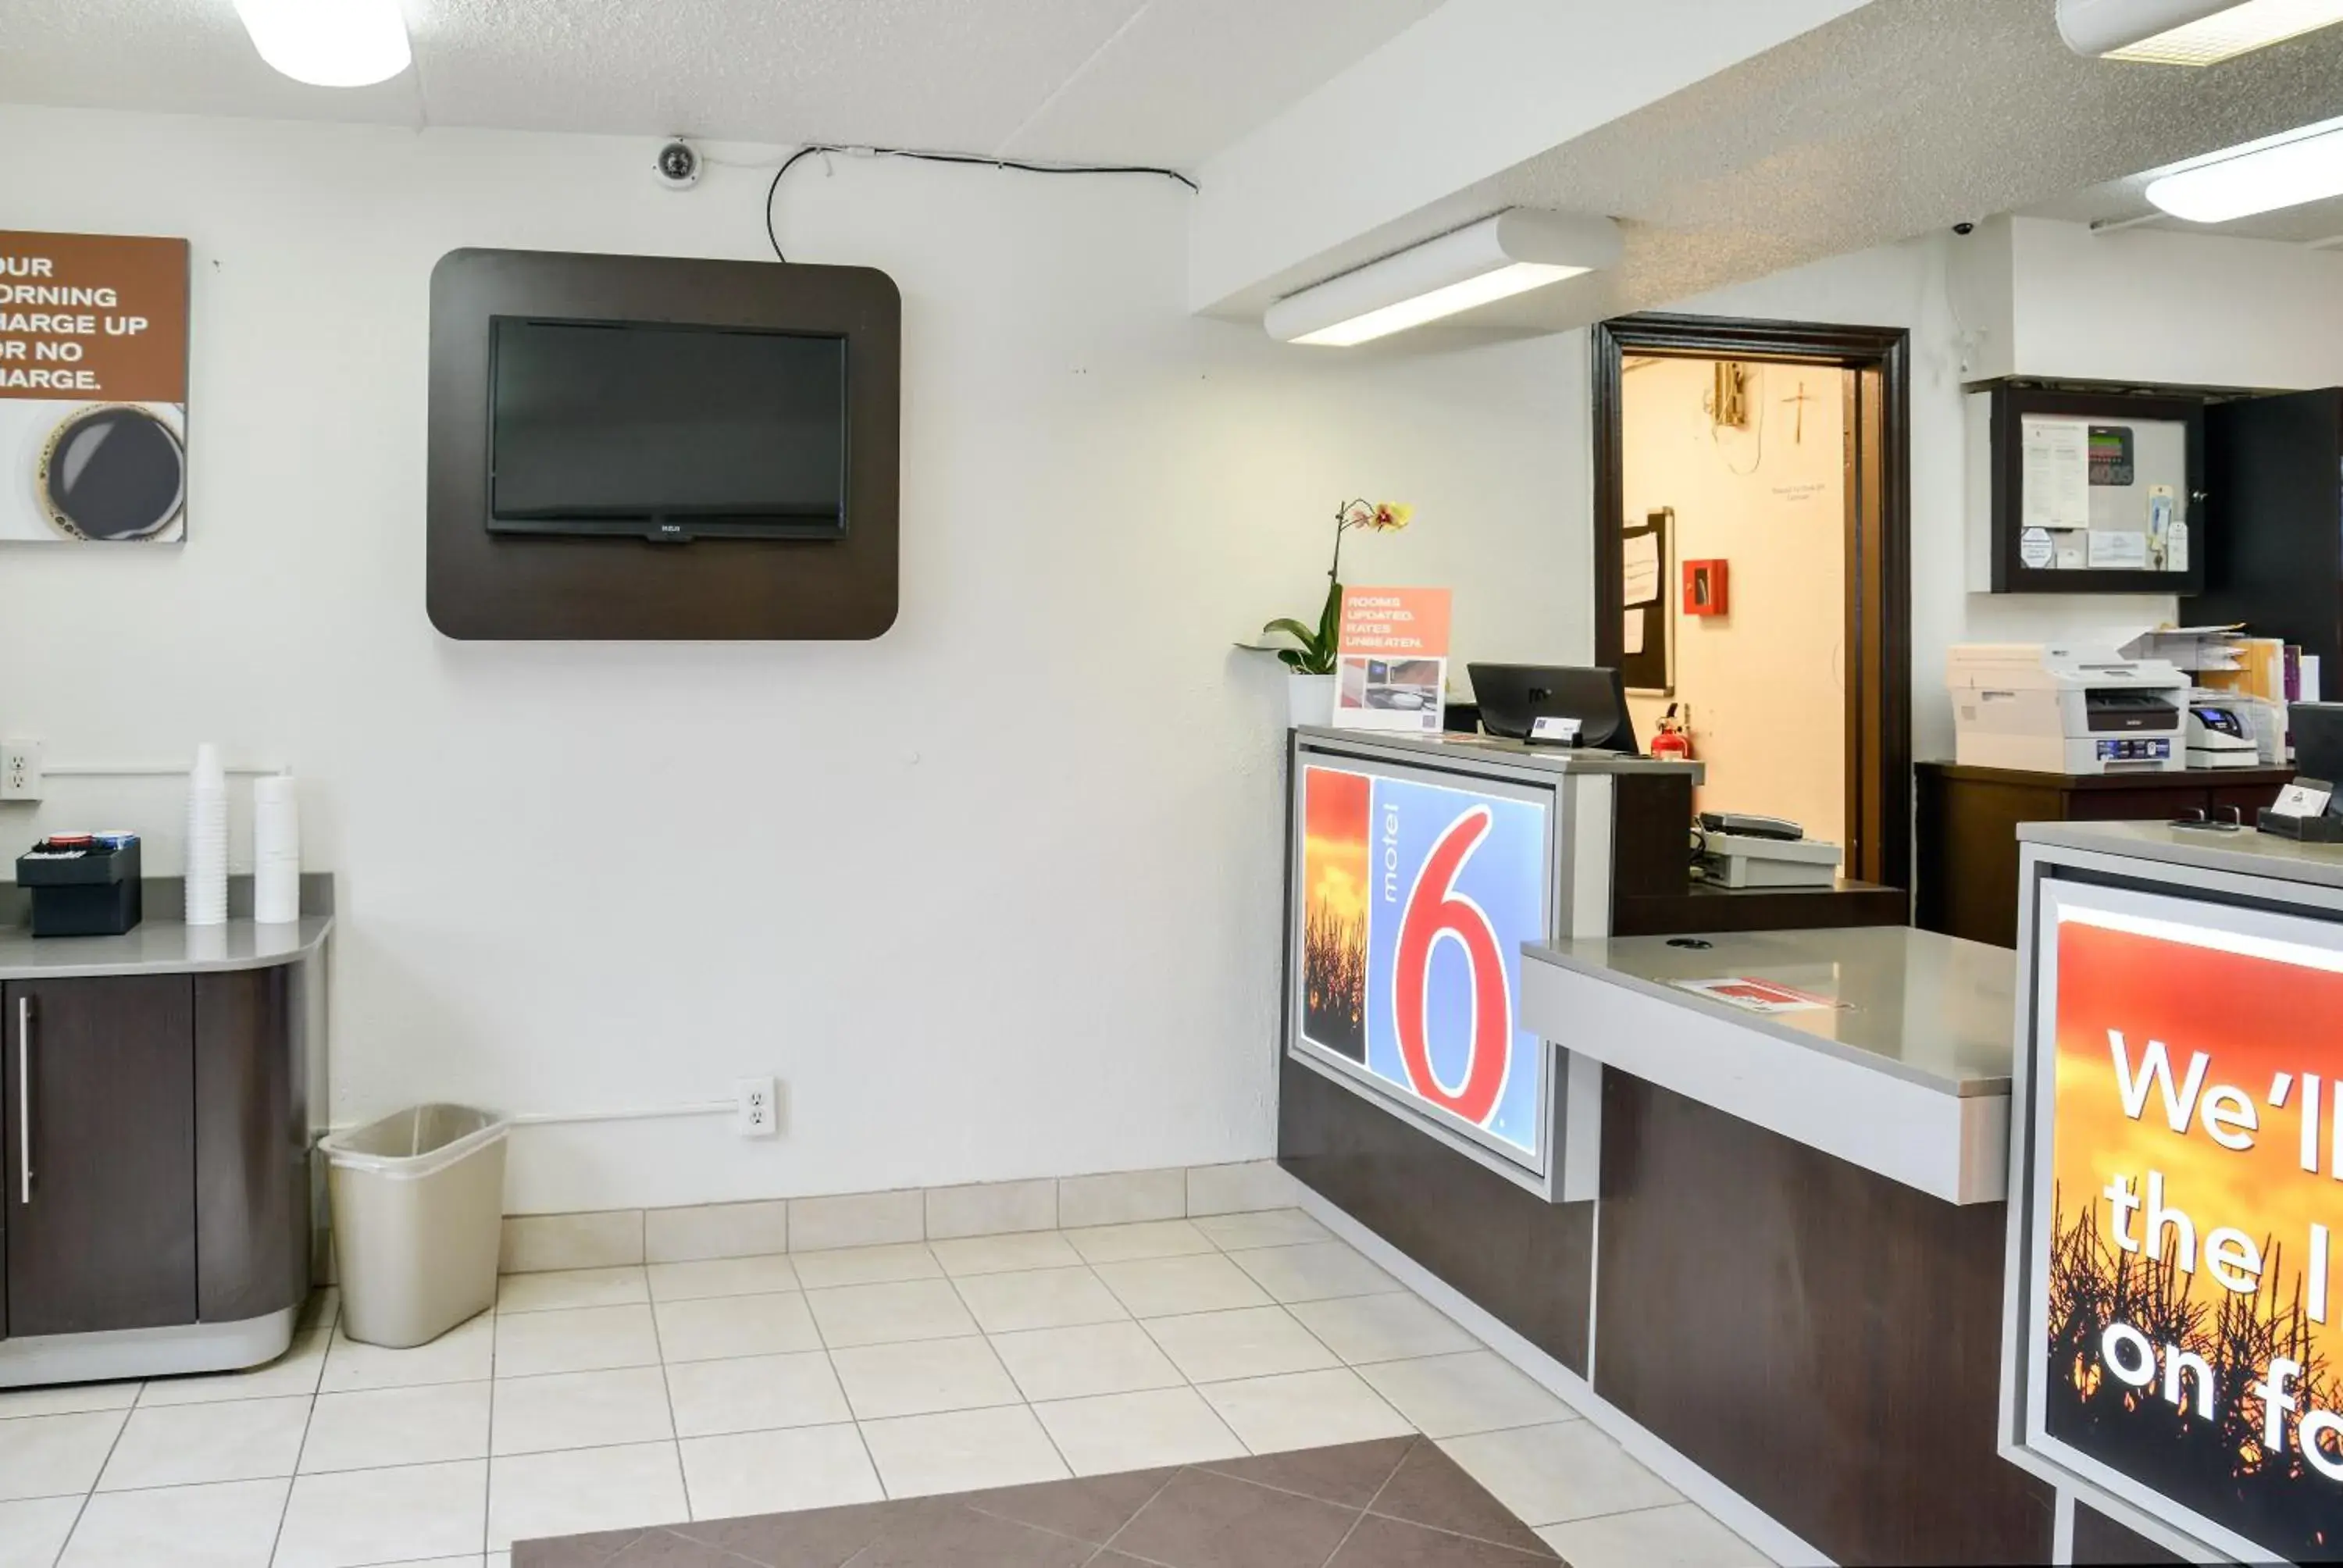 Lobby or reception in Motel 6-Toledo, OH